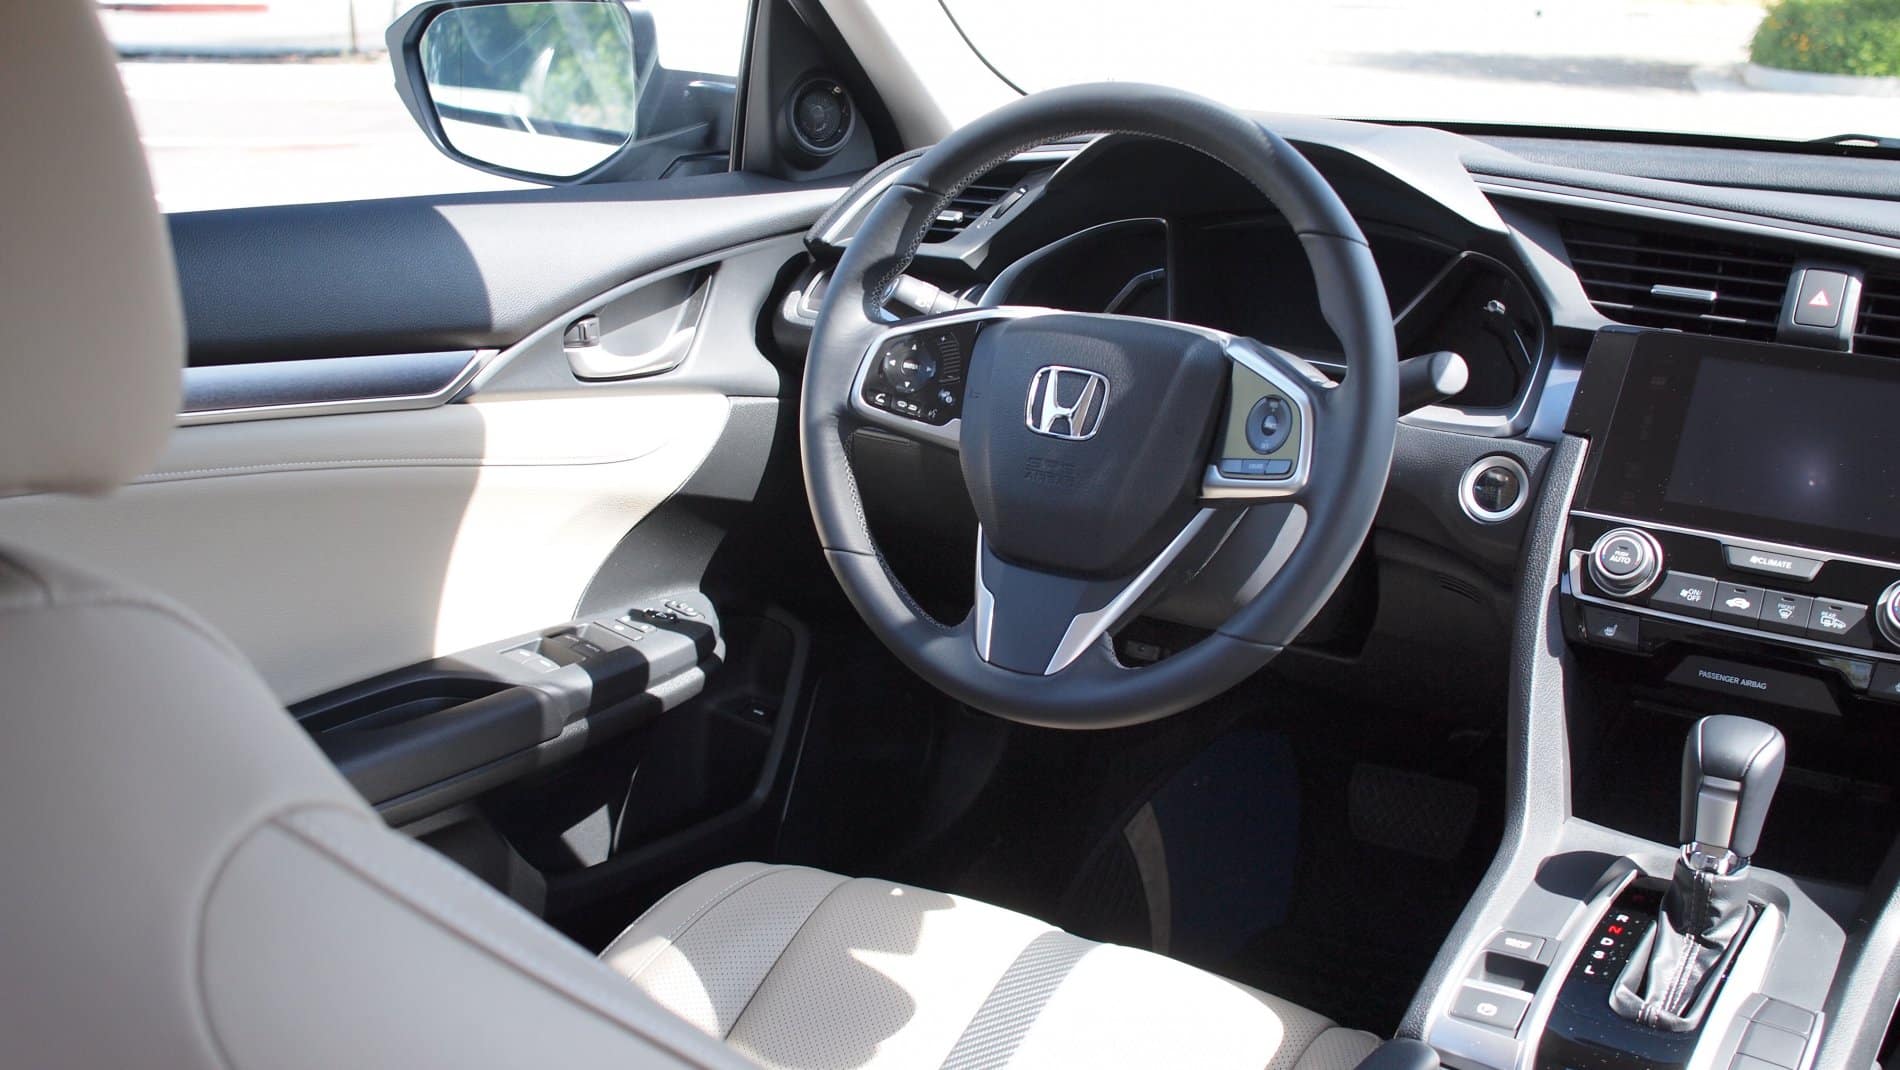 Honda Civic white interior in the partial sunlight. The darker parts of the interior are at risk of fading.